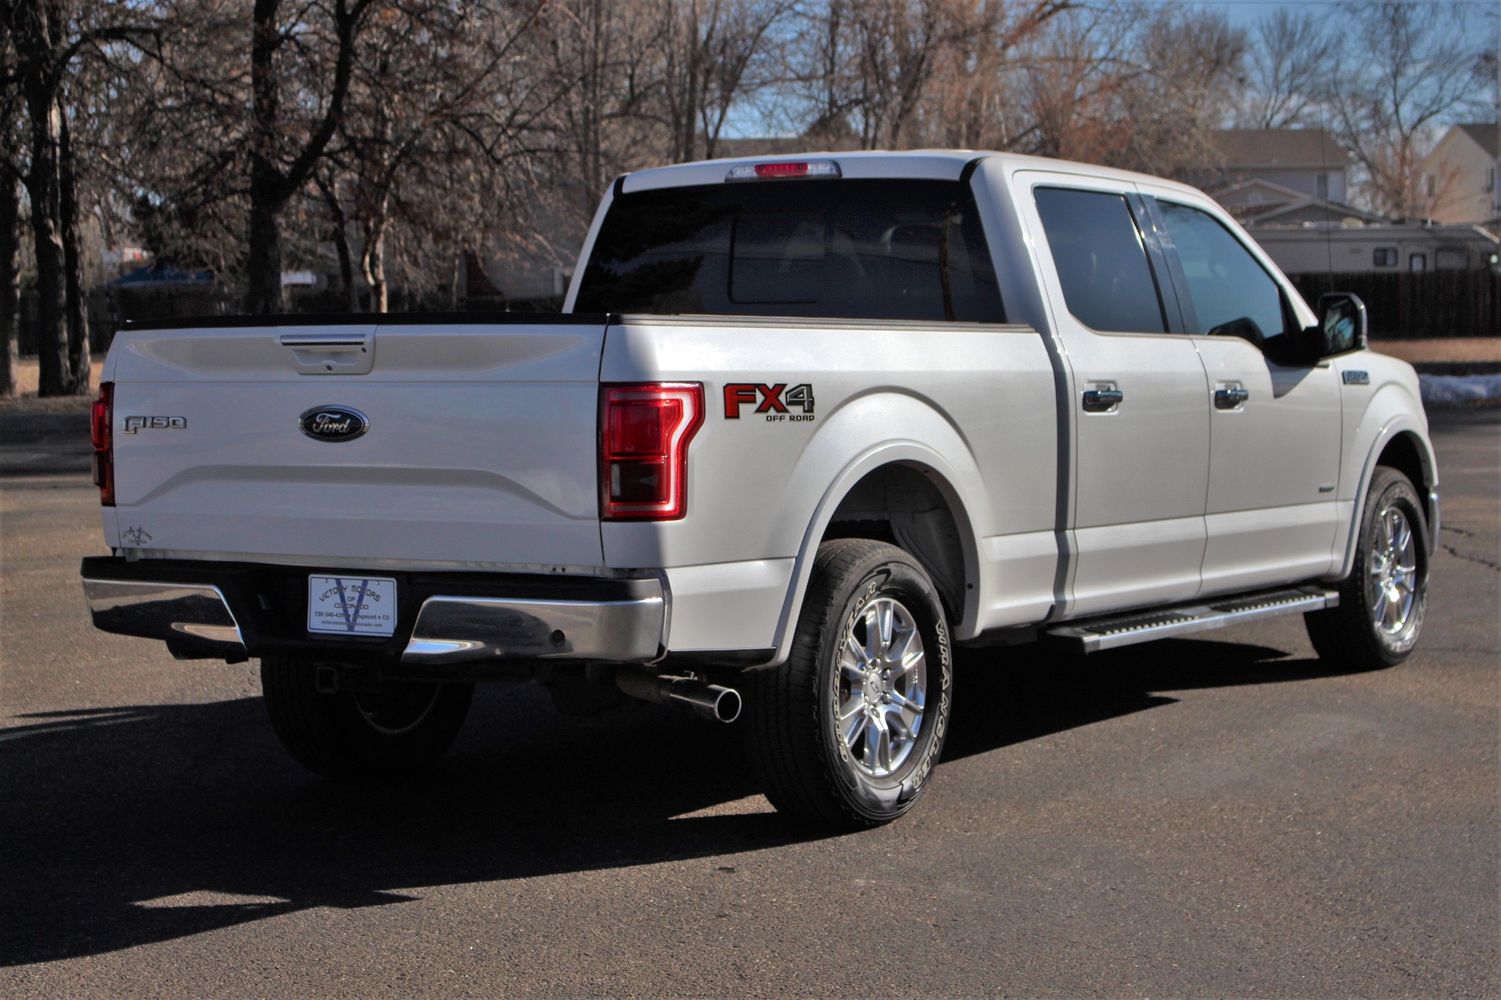 2015 Ford F-150 Lariat | Victory Motors of Colorado 2015 Ford F 150 Lariat 5.0 Towing Capacity